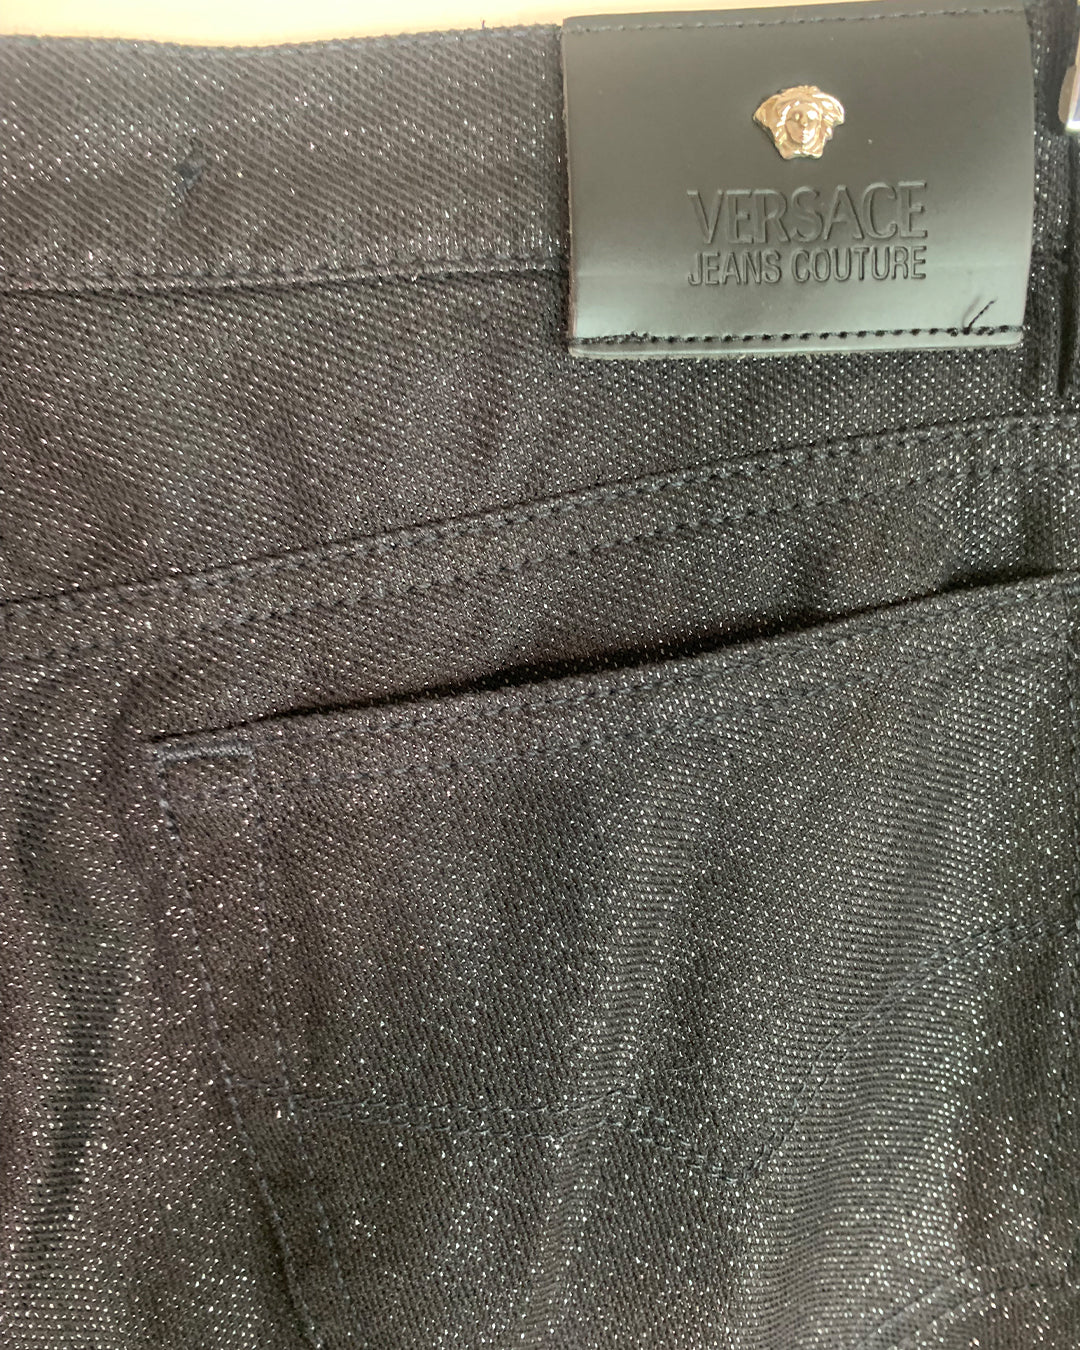 Versace Jeans Couture Glitter Luxe Jeans